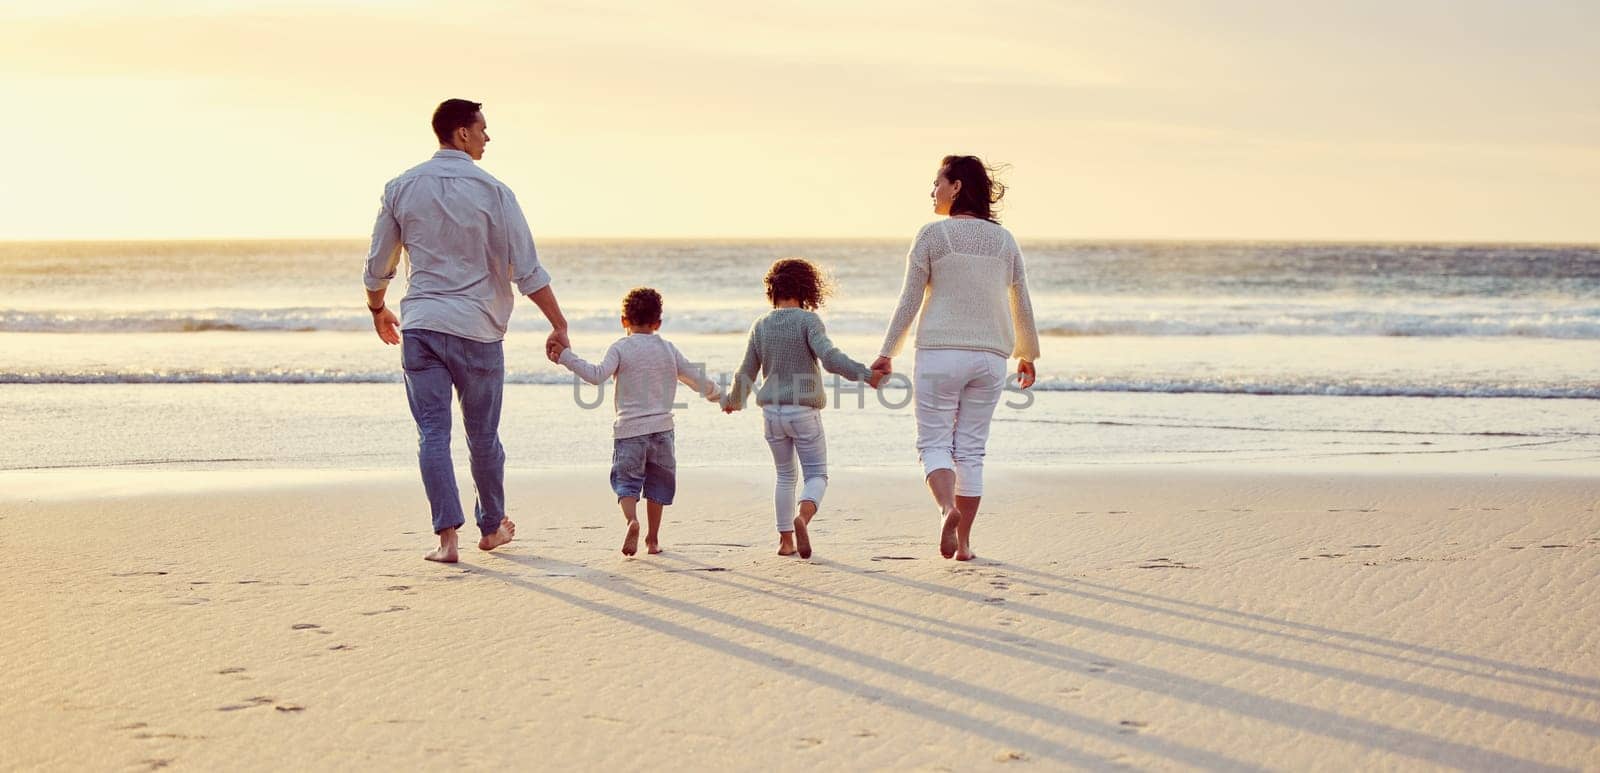 Sunset, walking on beach and family holding hands on holiday, summer vacation and weekend. Nature, travel and mother, father and children by ocean for bonding, adventure and quality time together.